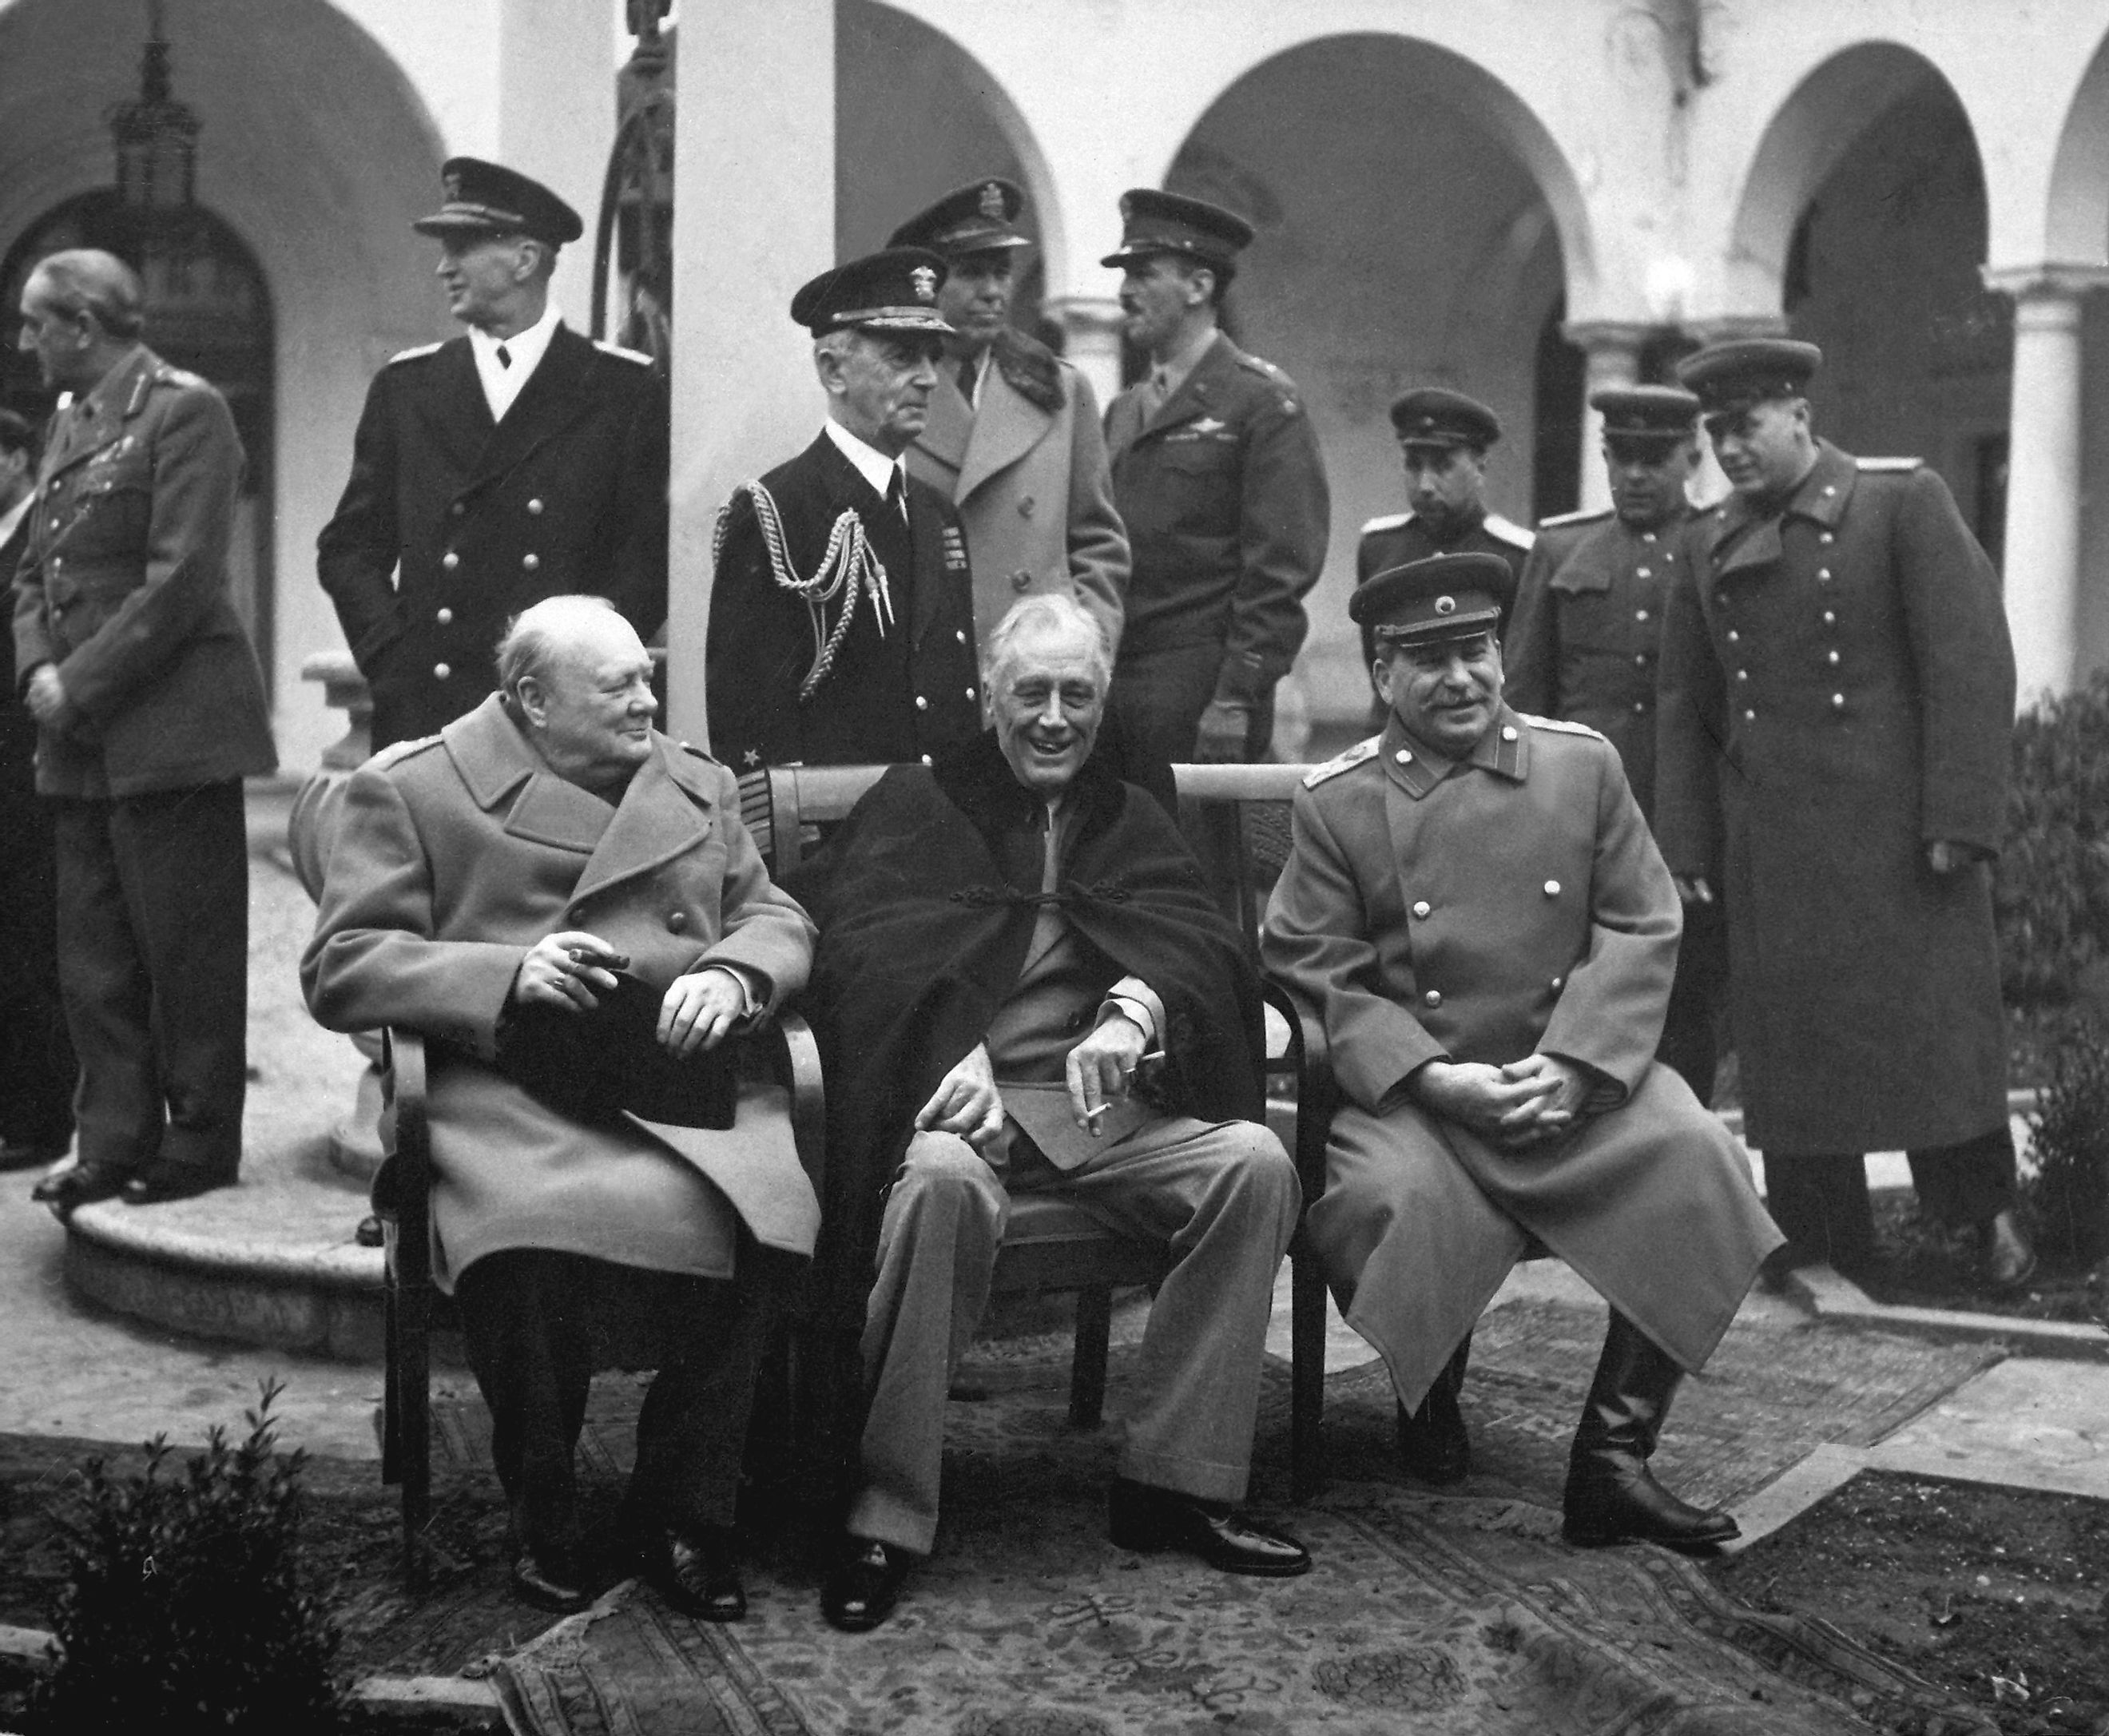 The "Big Three" at the Yalta Conference: Winston Churchill, Franklin D. Roosevelt, and Joseph Stalin, 1945